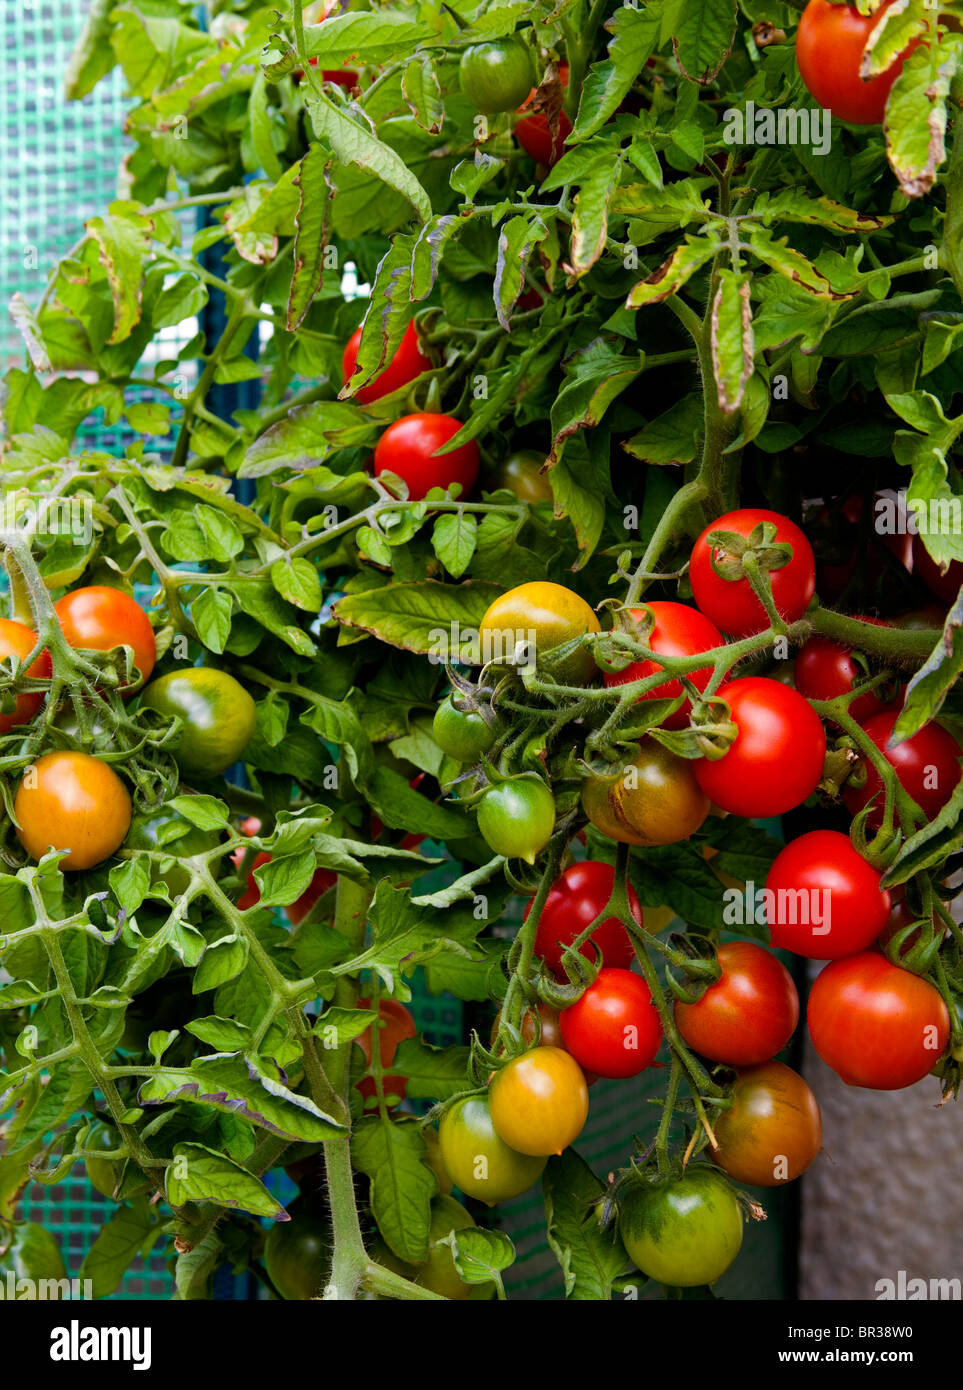 Plant of of red ripe and green unripe tomatoes Stock Photo